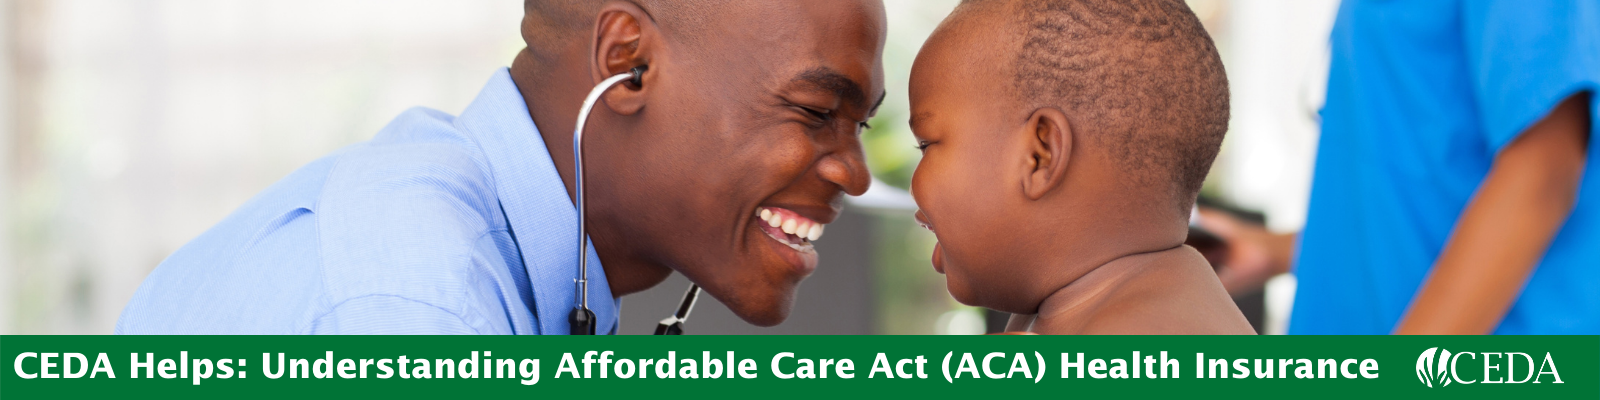 CEDA Helps: Understanding Affordable Care Act (ACA) Health Insurance